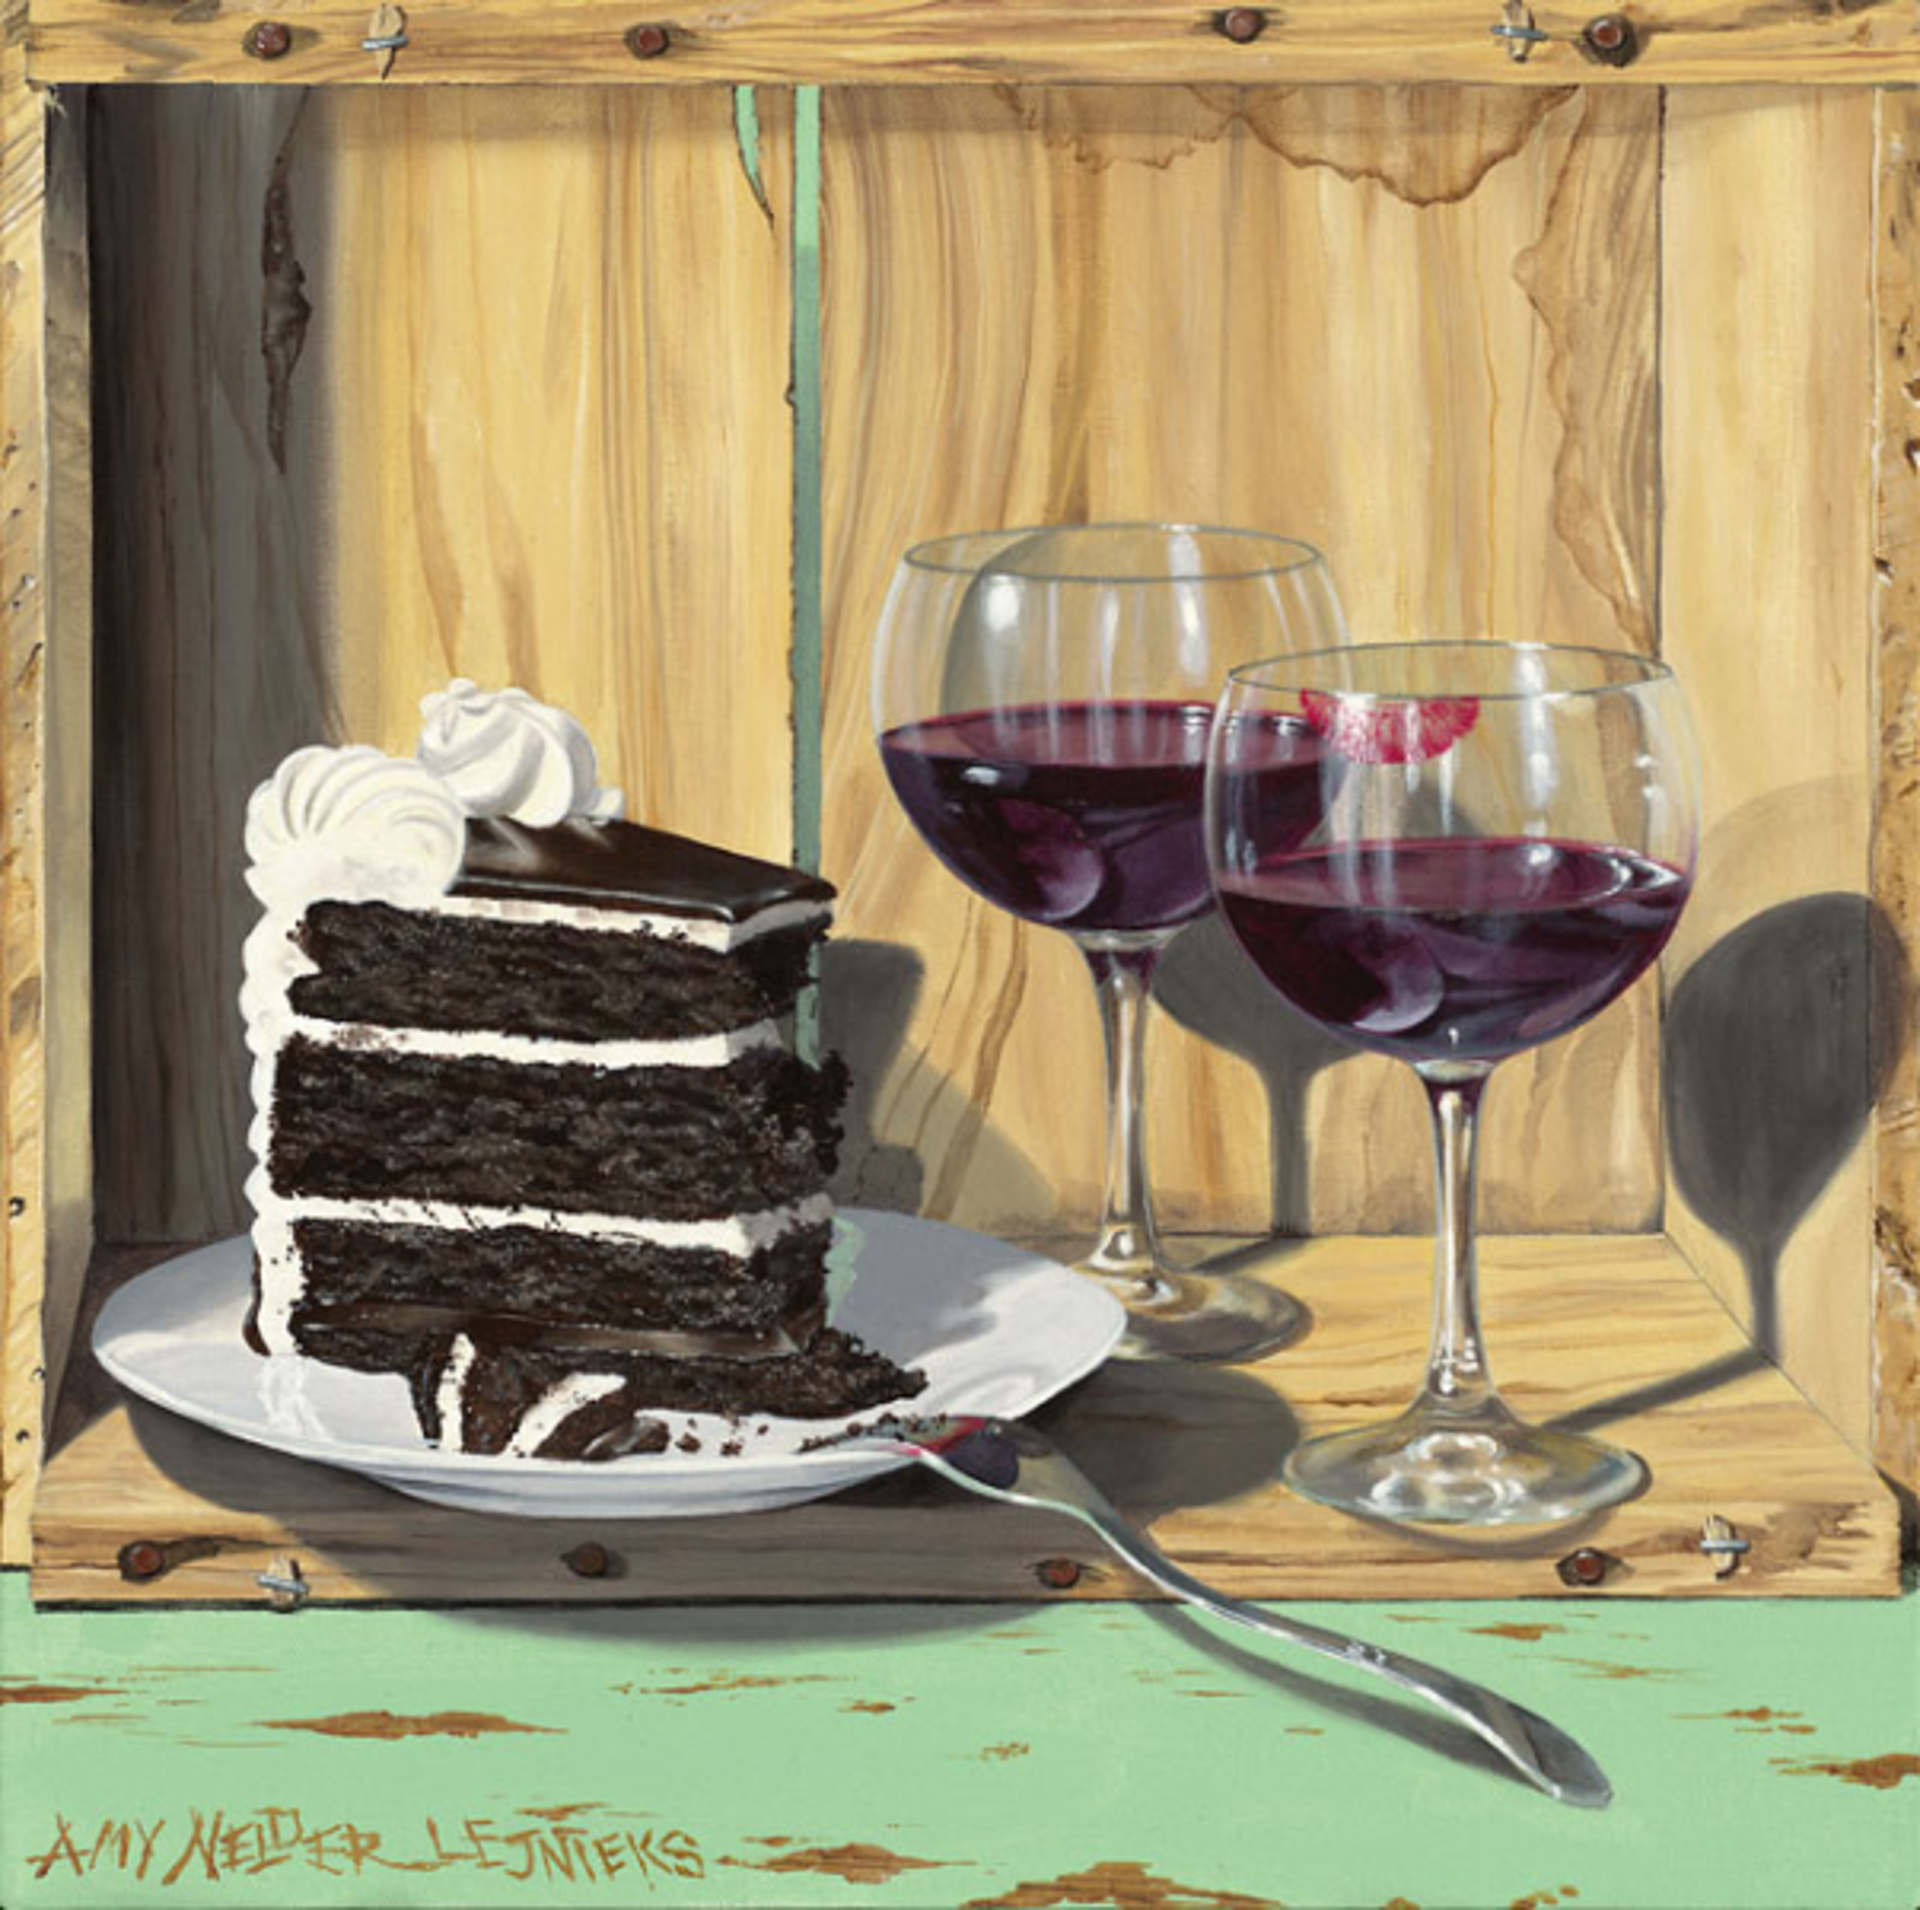 Cake Interrupted (S/N) by Amy Nelder